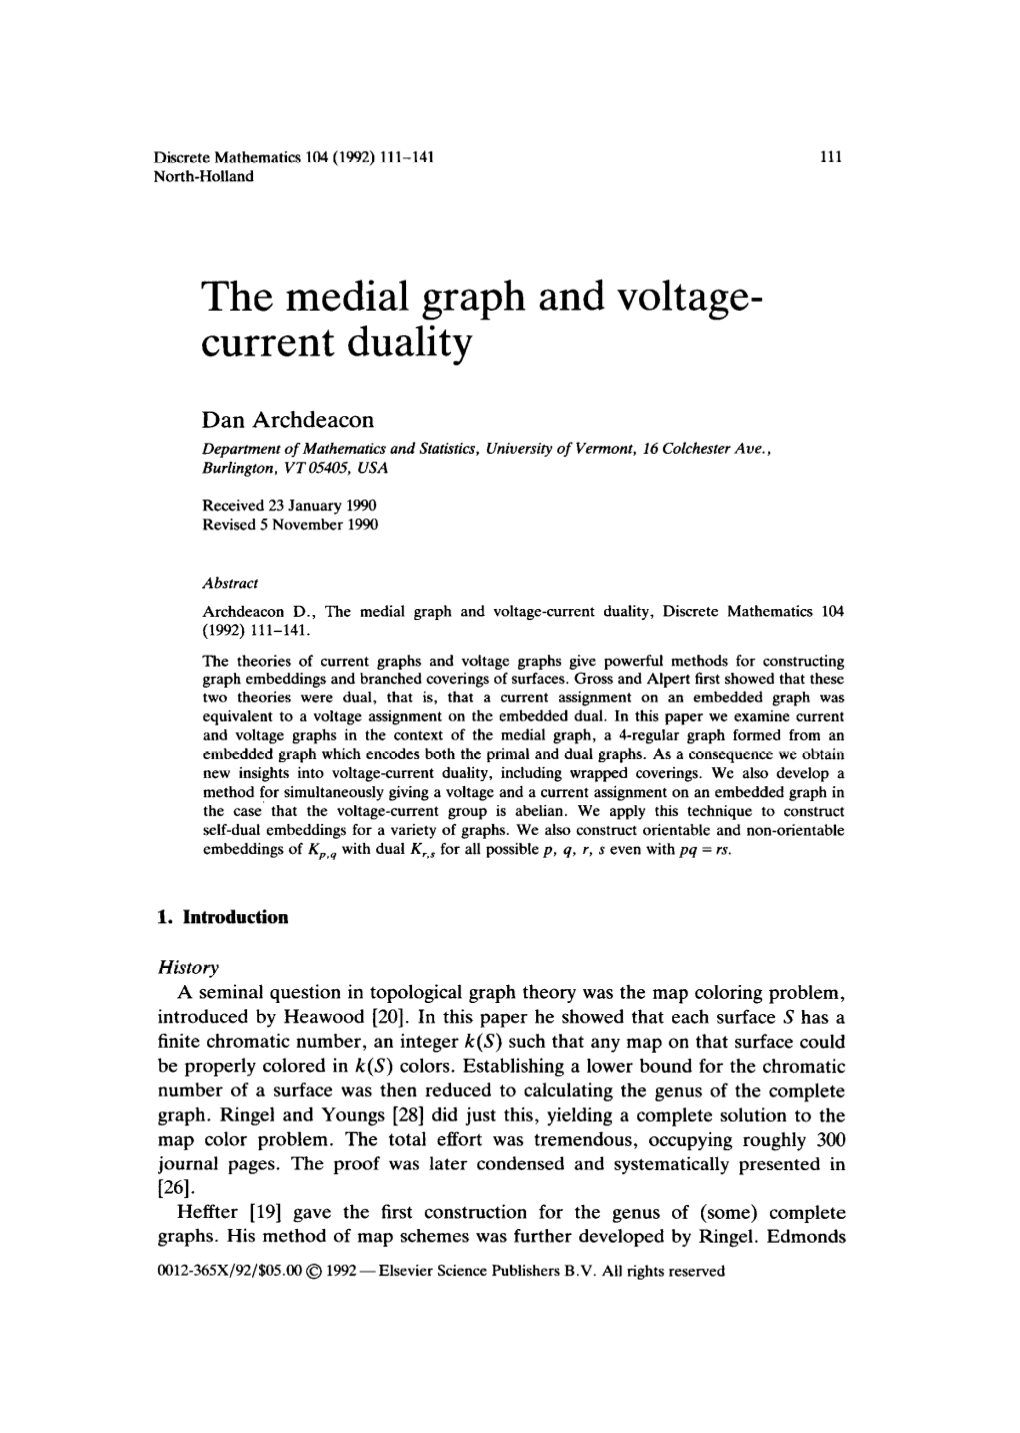 The Medial Graph and Voltage- Current Duality